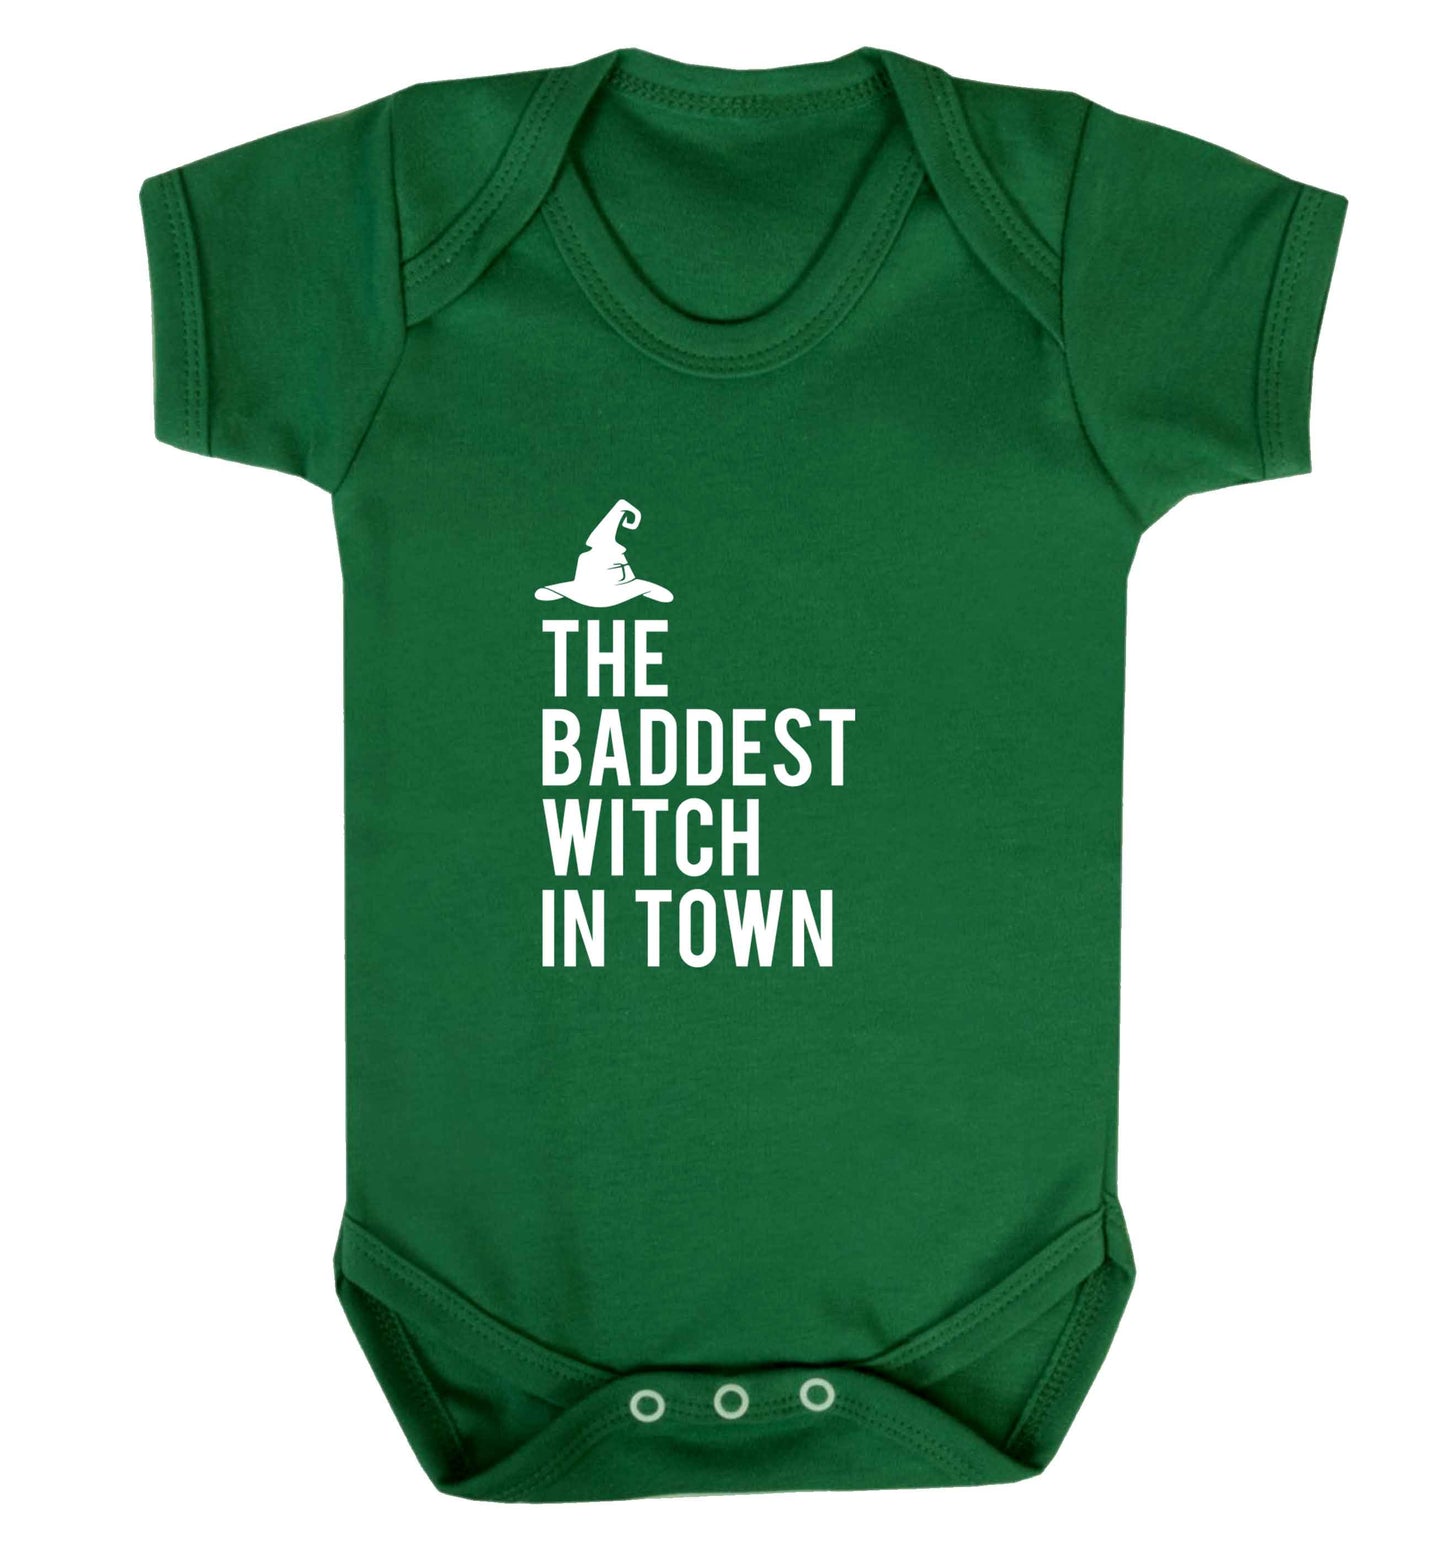 Badest witch in town baby vest green 18-24 months